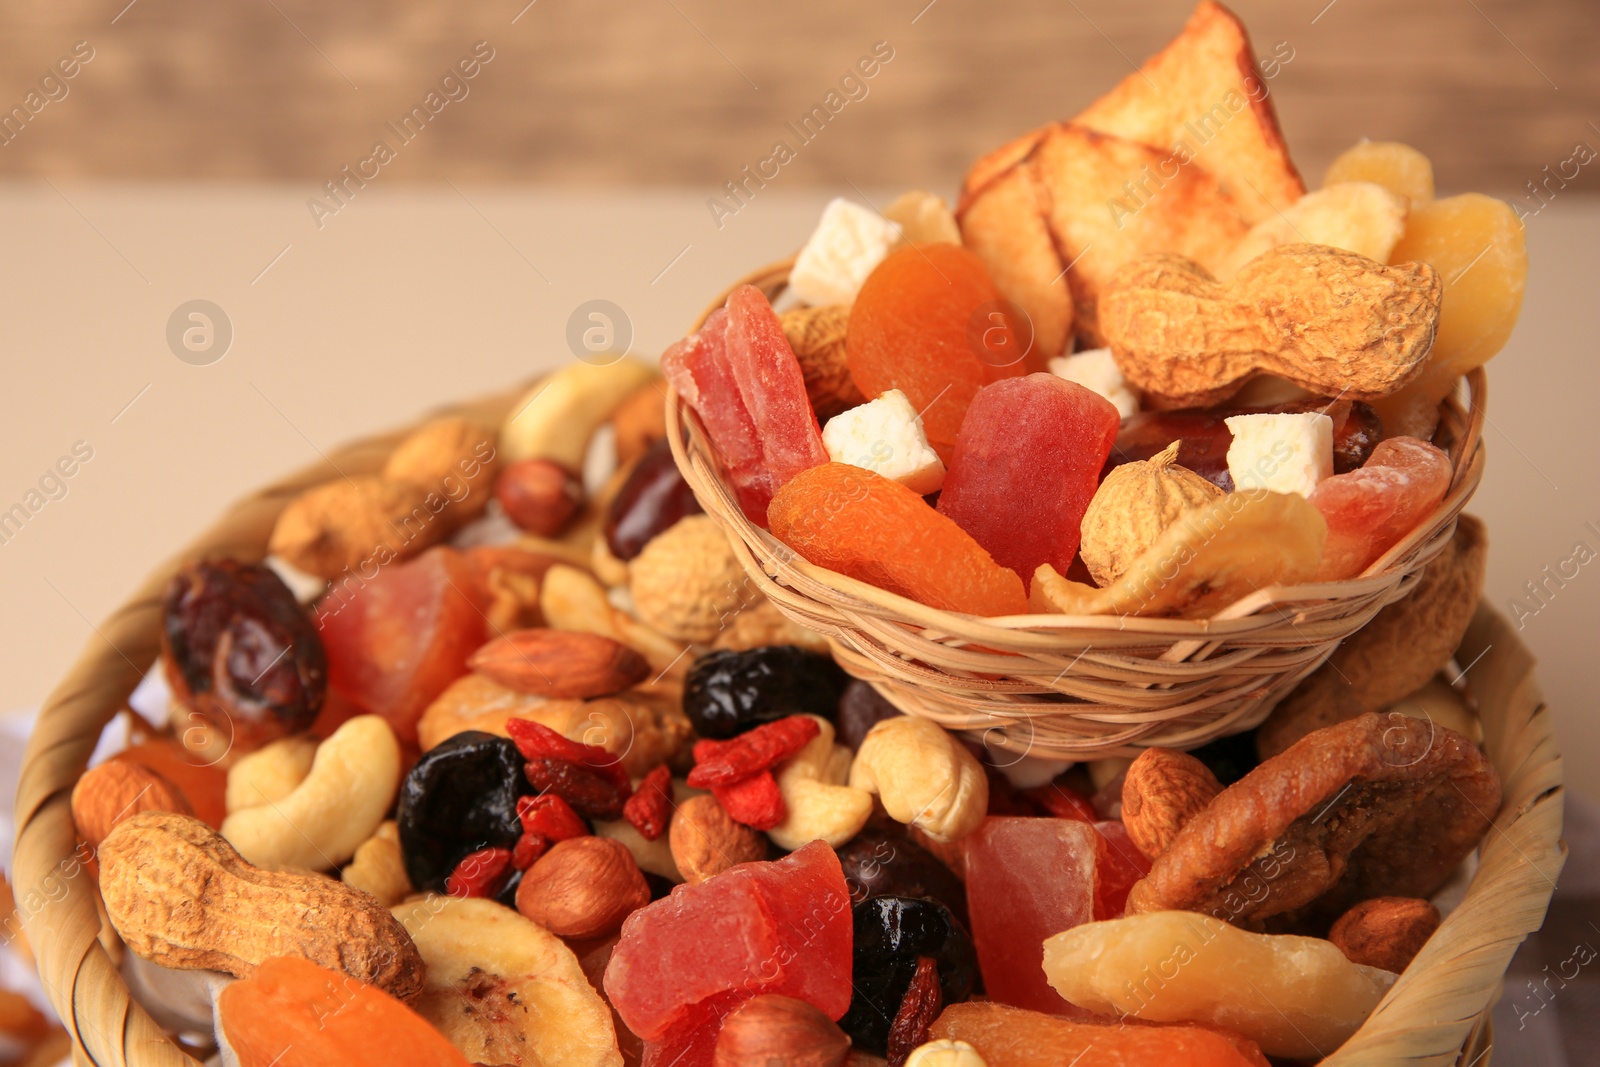 Photo of Wicker baskets with mixed dried fruits and nuts on blurred background, closeup